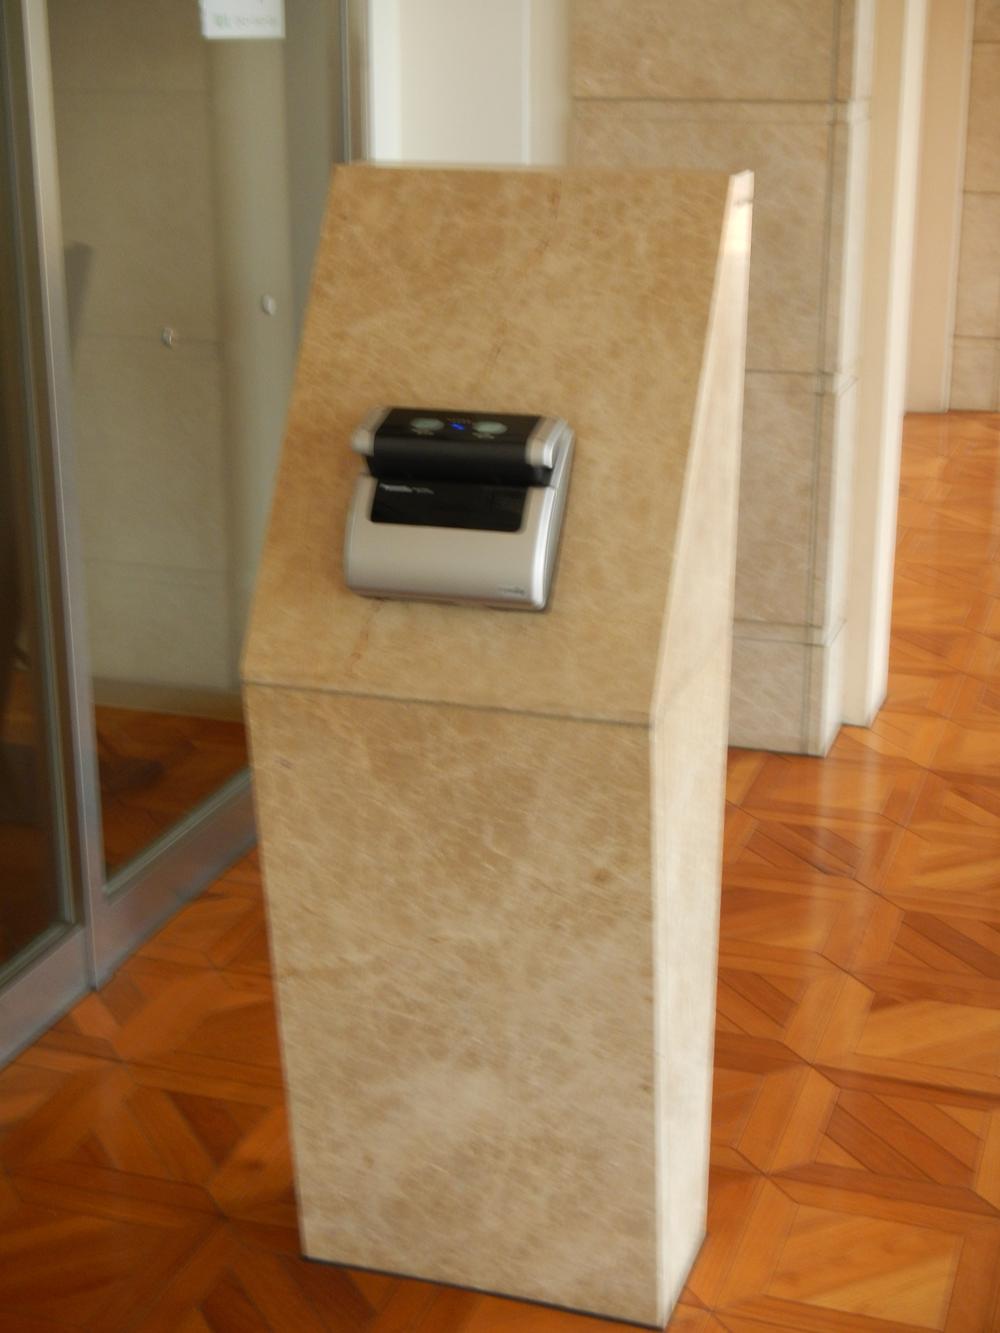 Entrance. Common areas Iris authentication system